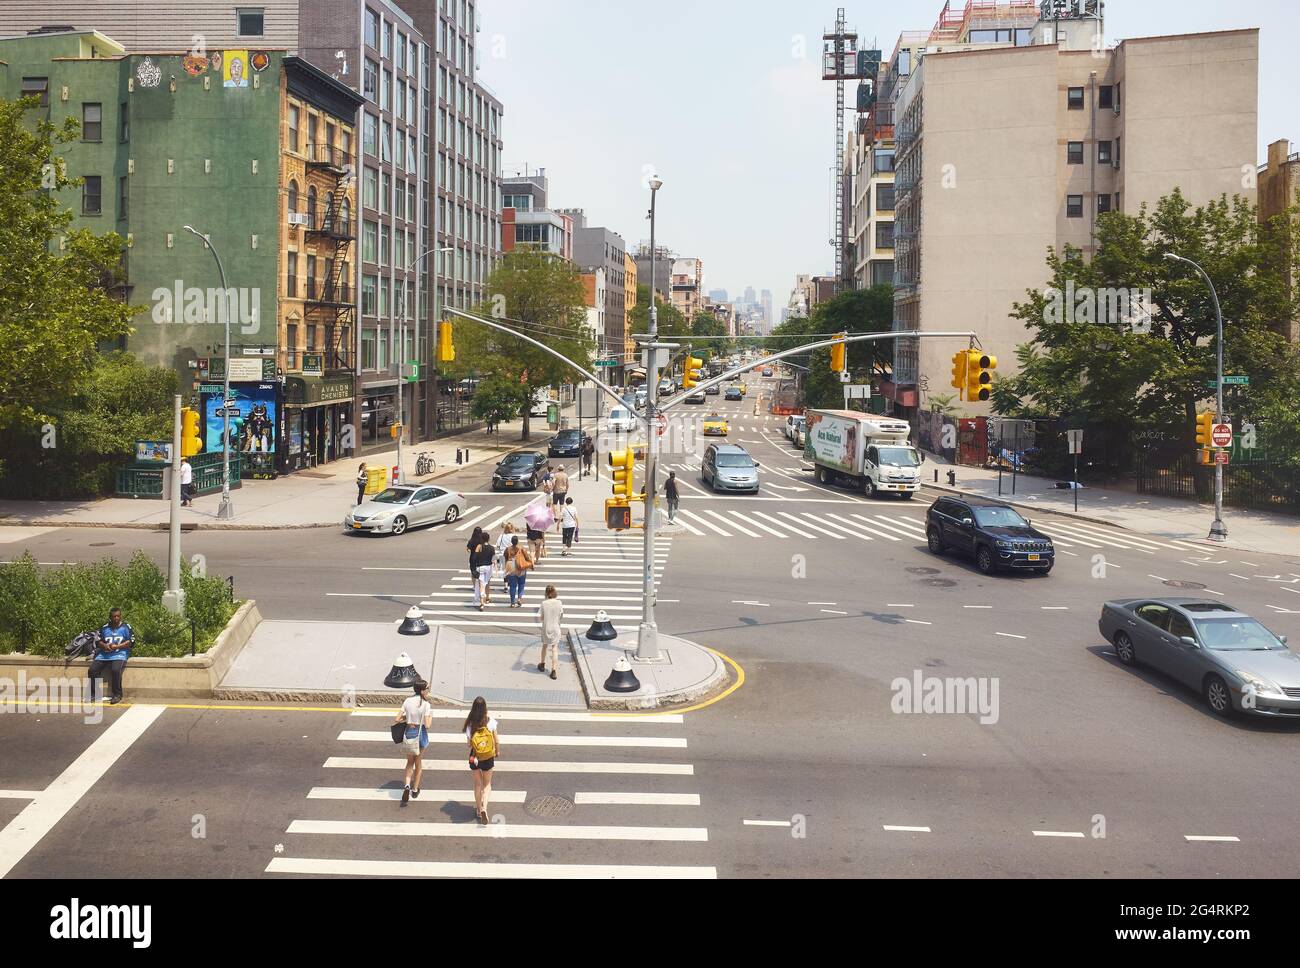 New York, USA - July 03, 2018: 2nd Avenue and East Houston Street busy intersection on a summer day. Stock Photo